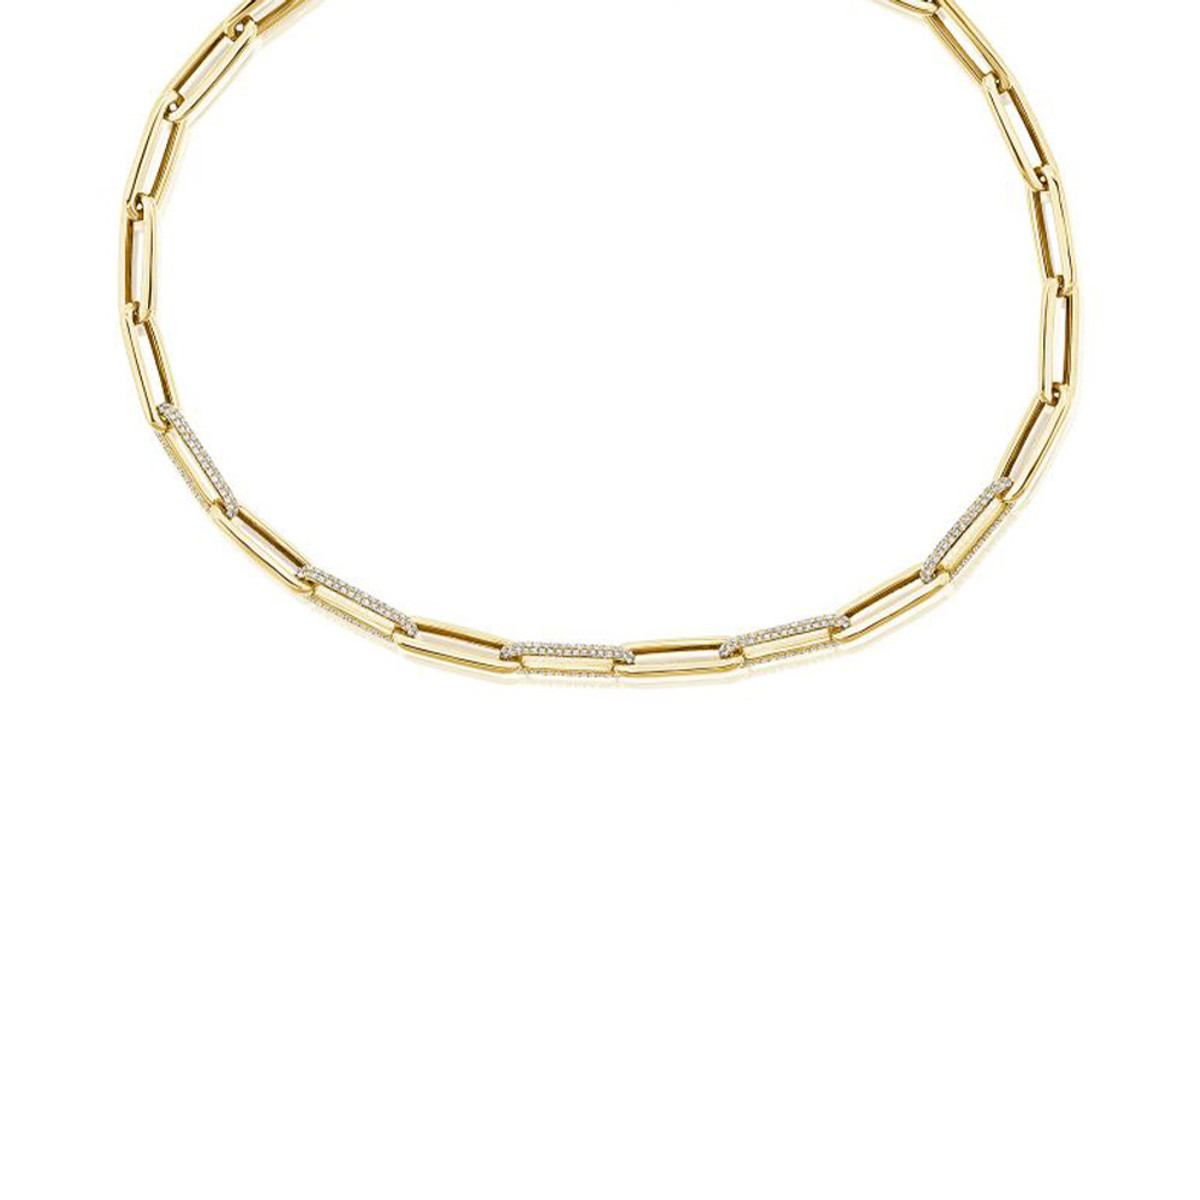 Hyde Park Collection 14K Yellow Gold Diamond Link Necklace-38437 Product Image